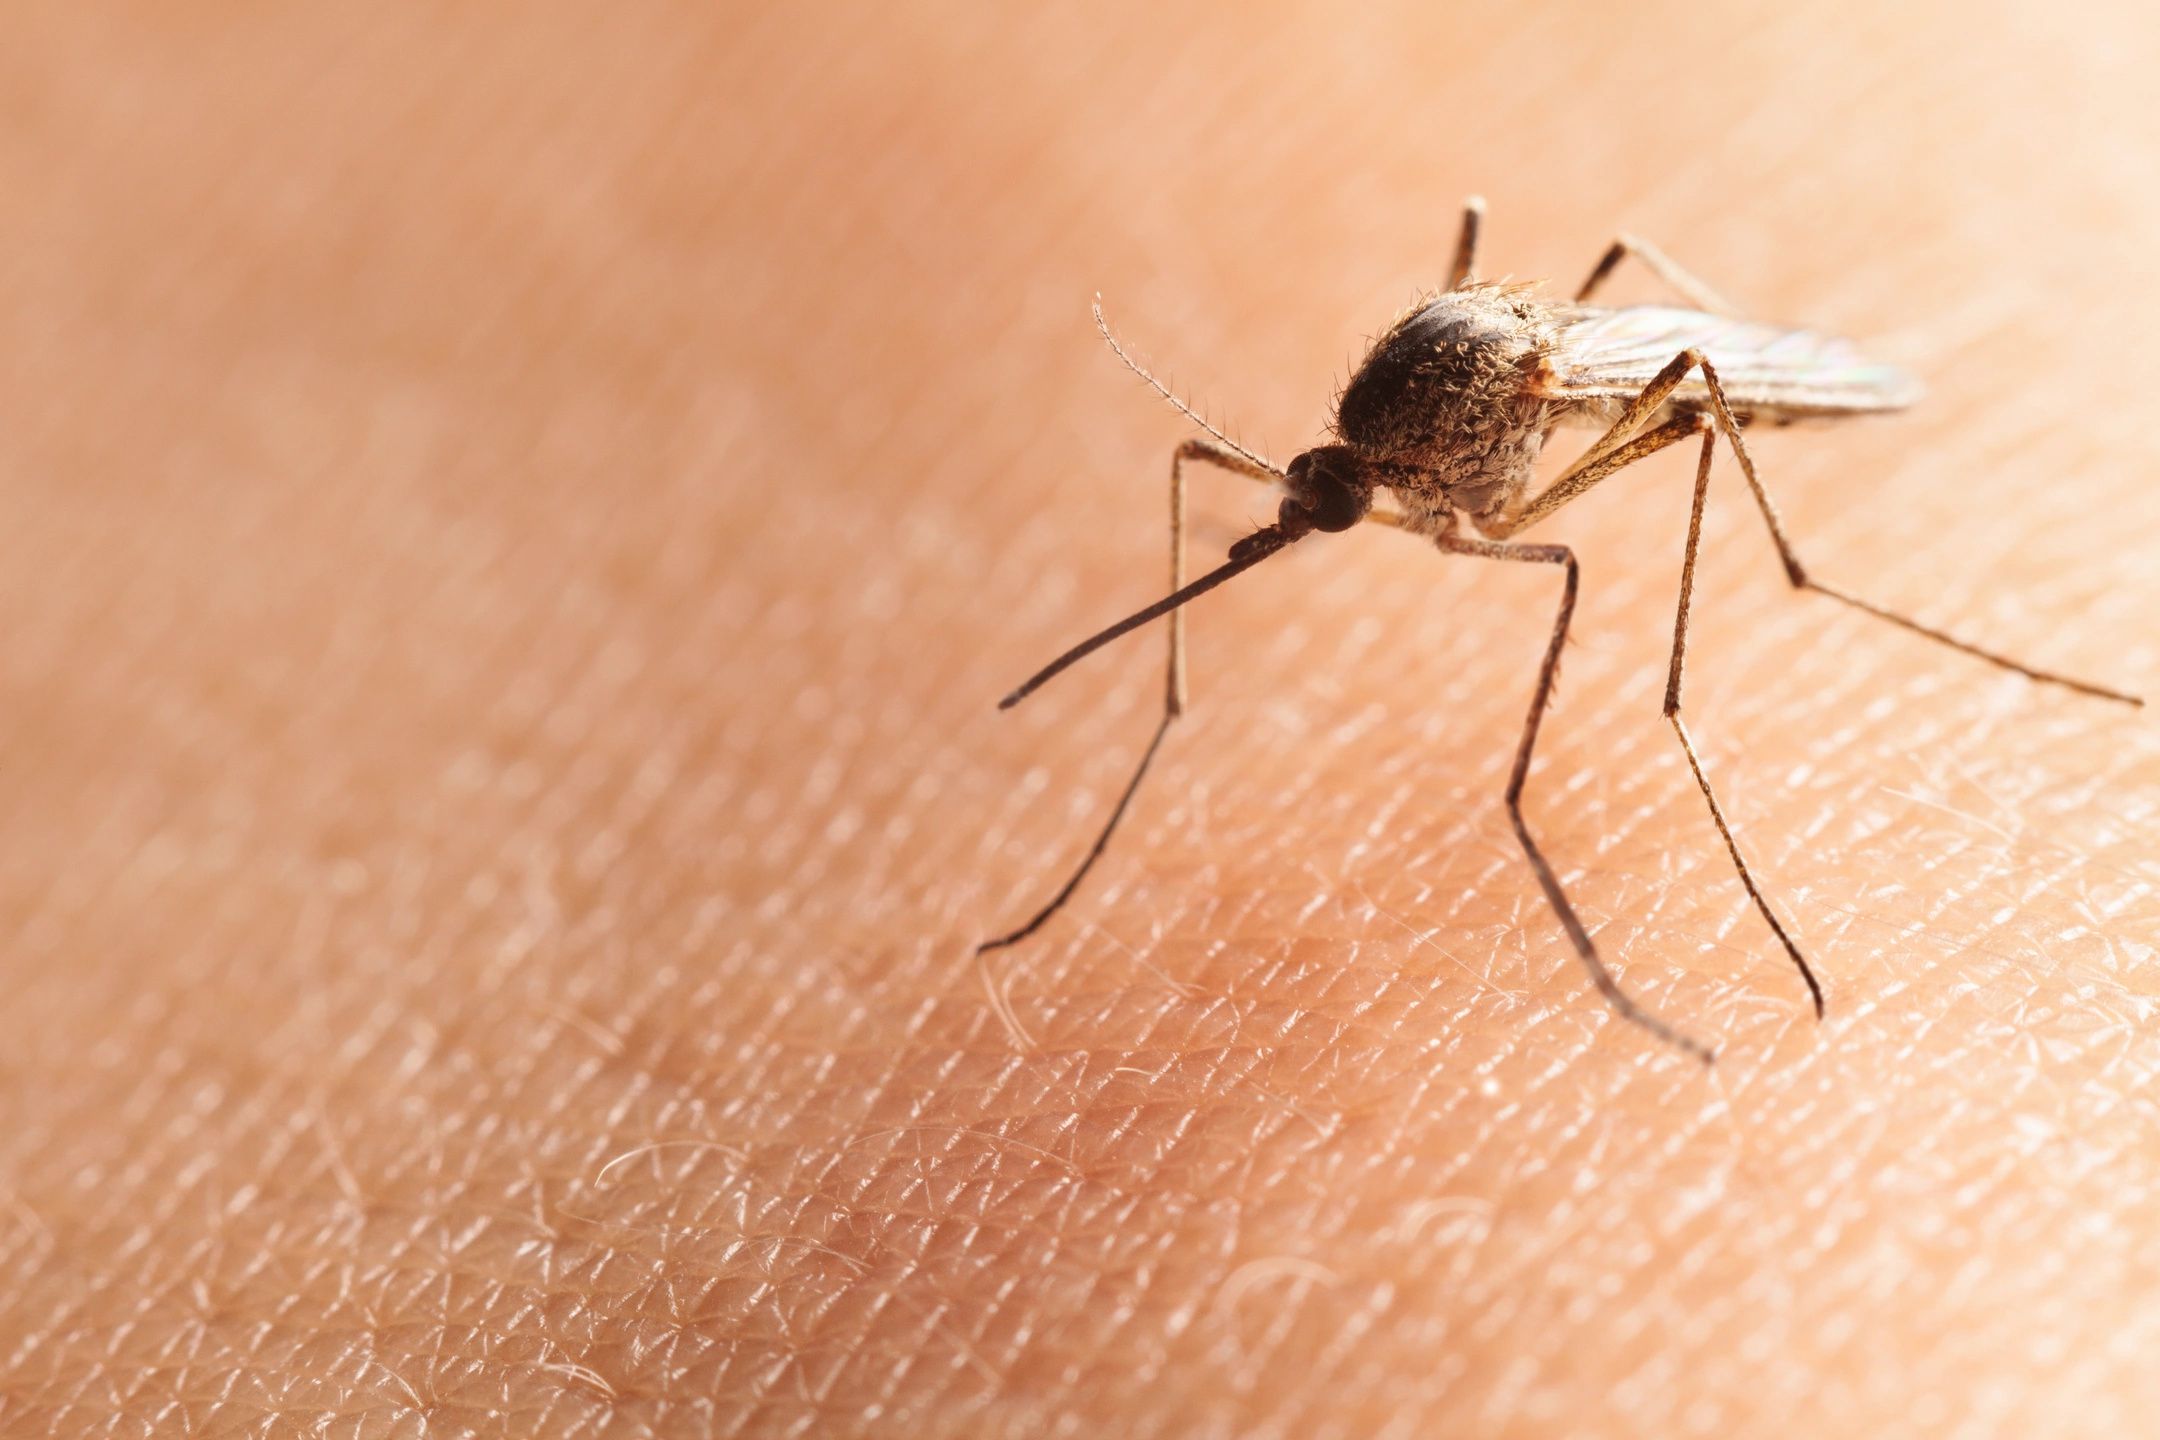 Close-up photo of mosquito on human skin